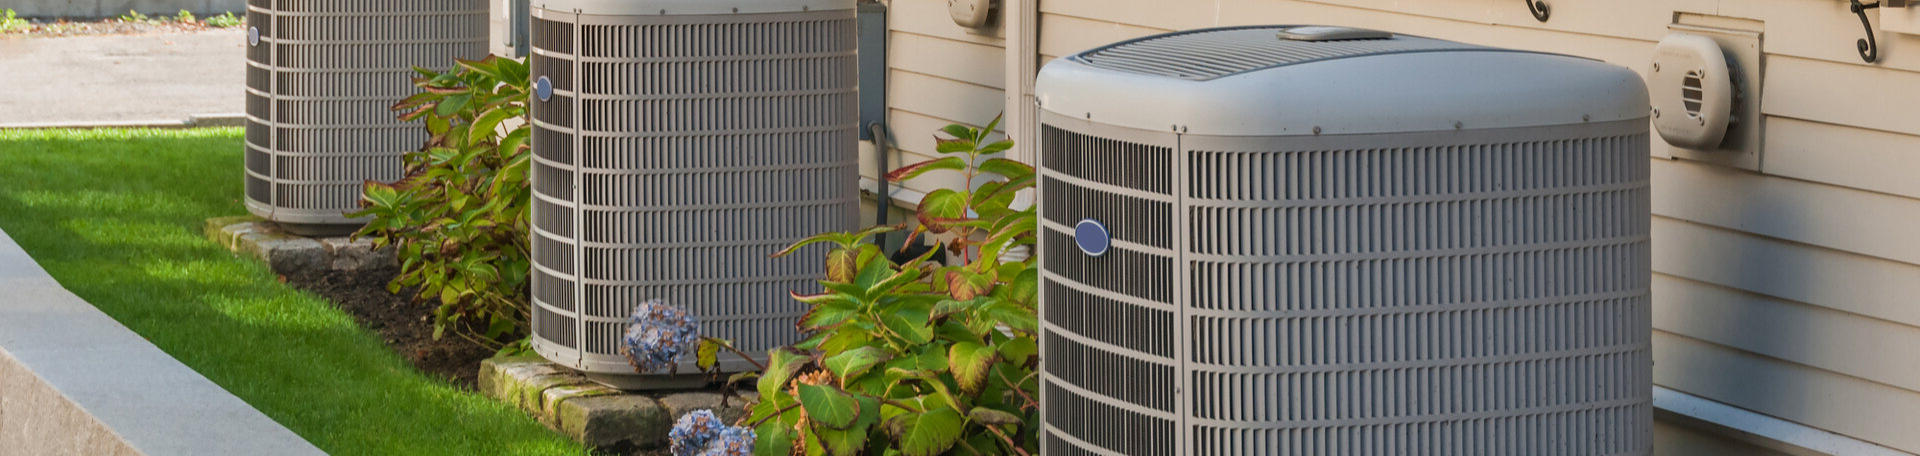 Mo's Heating and Air Conditioning Services